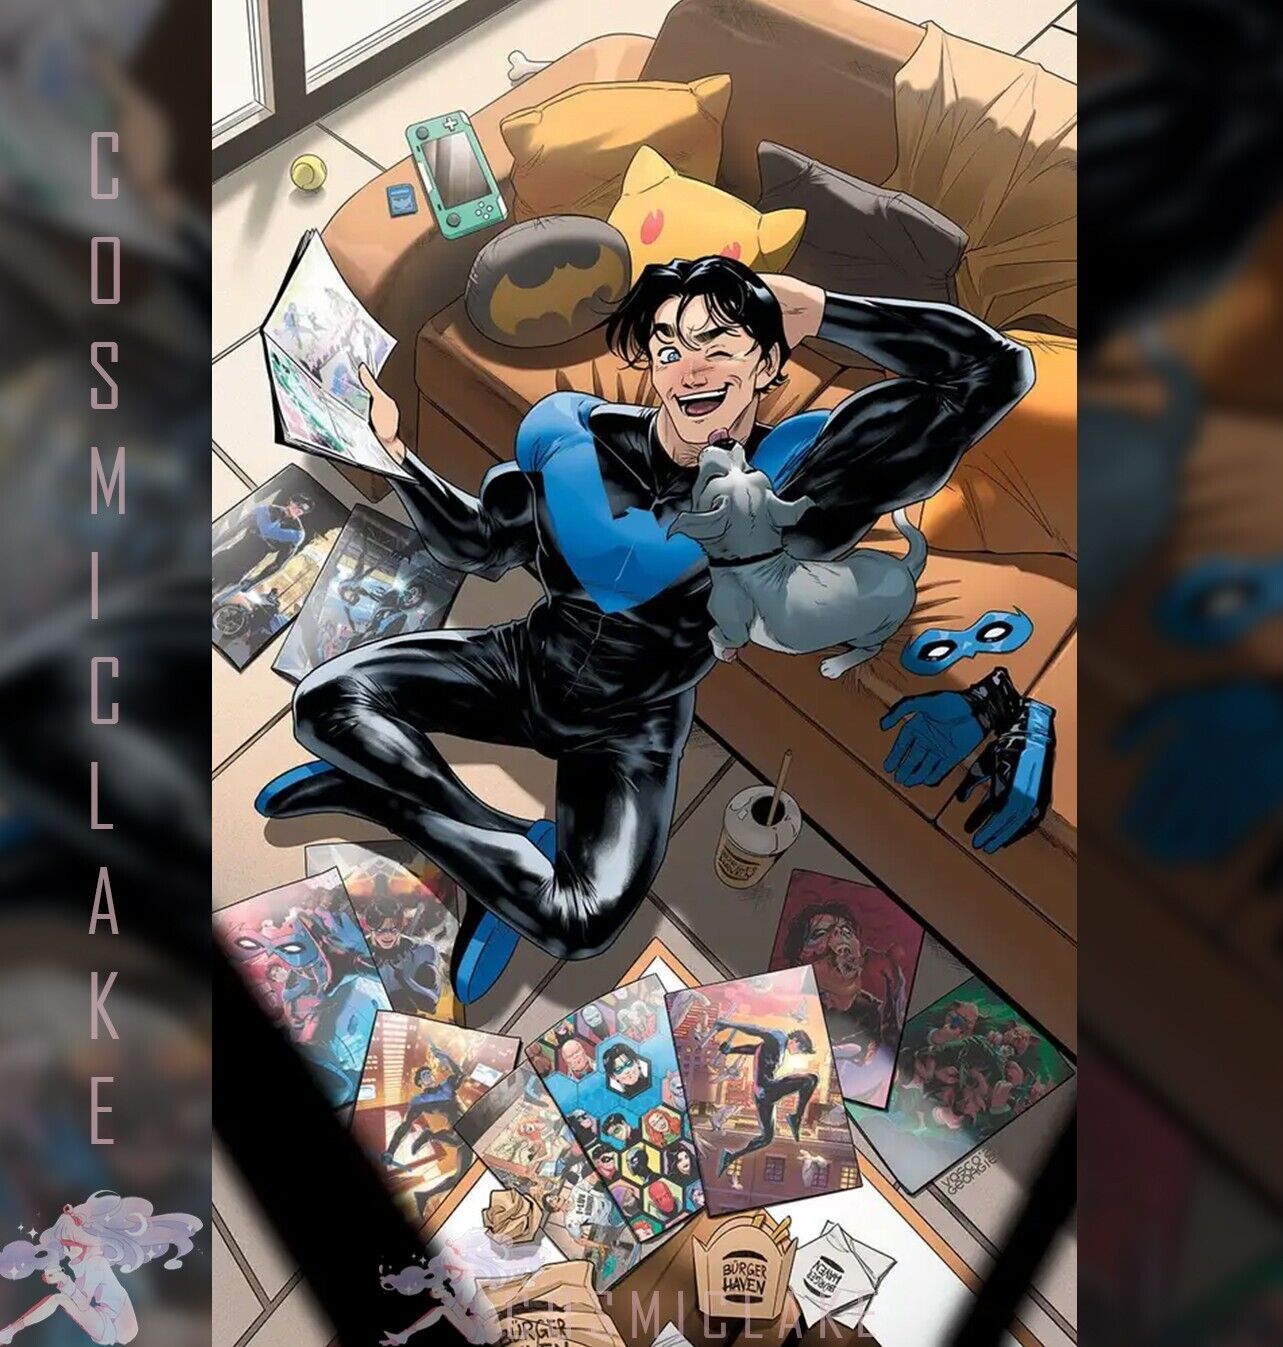 NIGHTWING UNCOVERED #1 1:25 GEORGIEV INCENTIVE RATIO VARIANT PREORDER 9/11☪